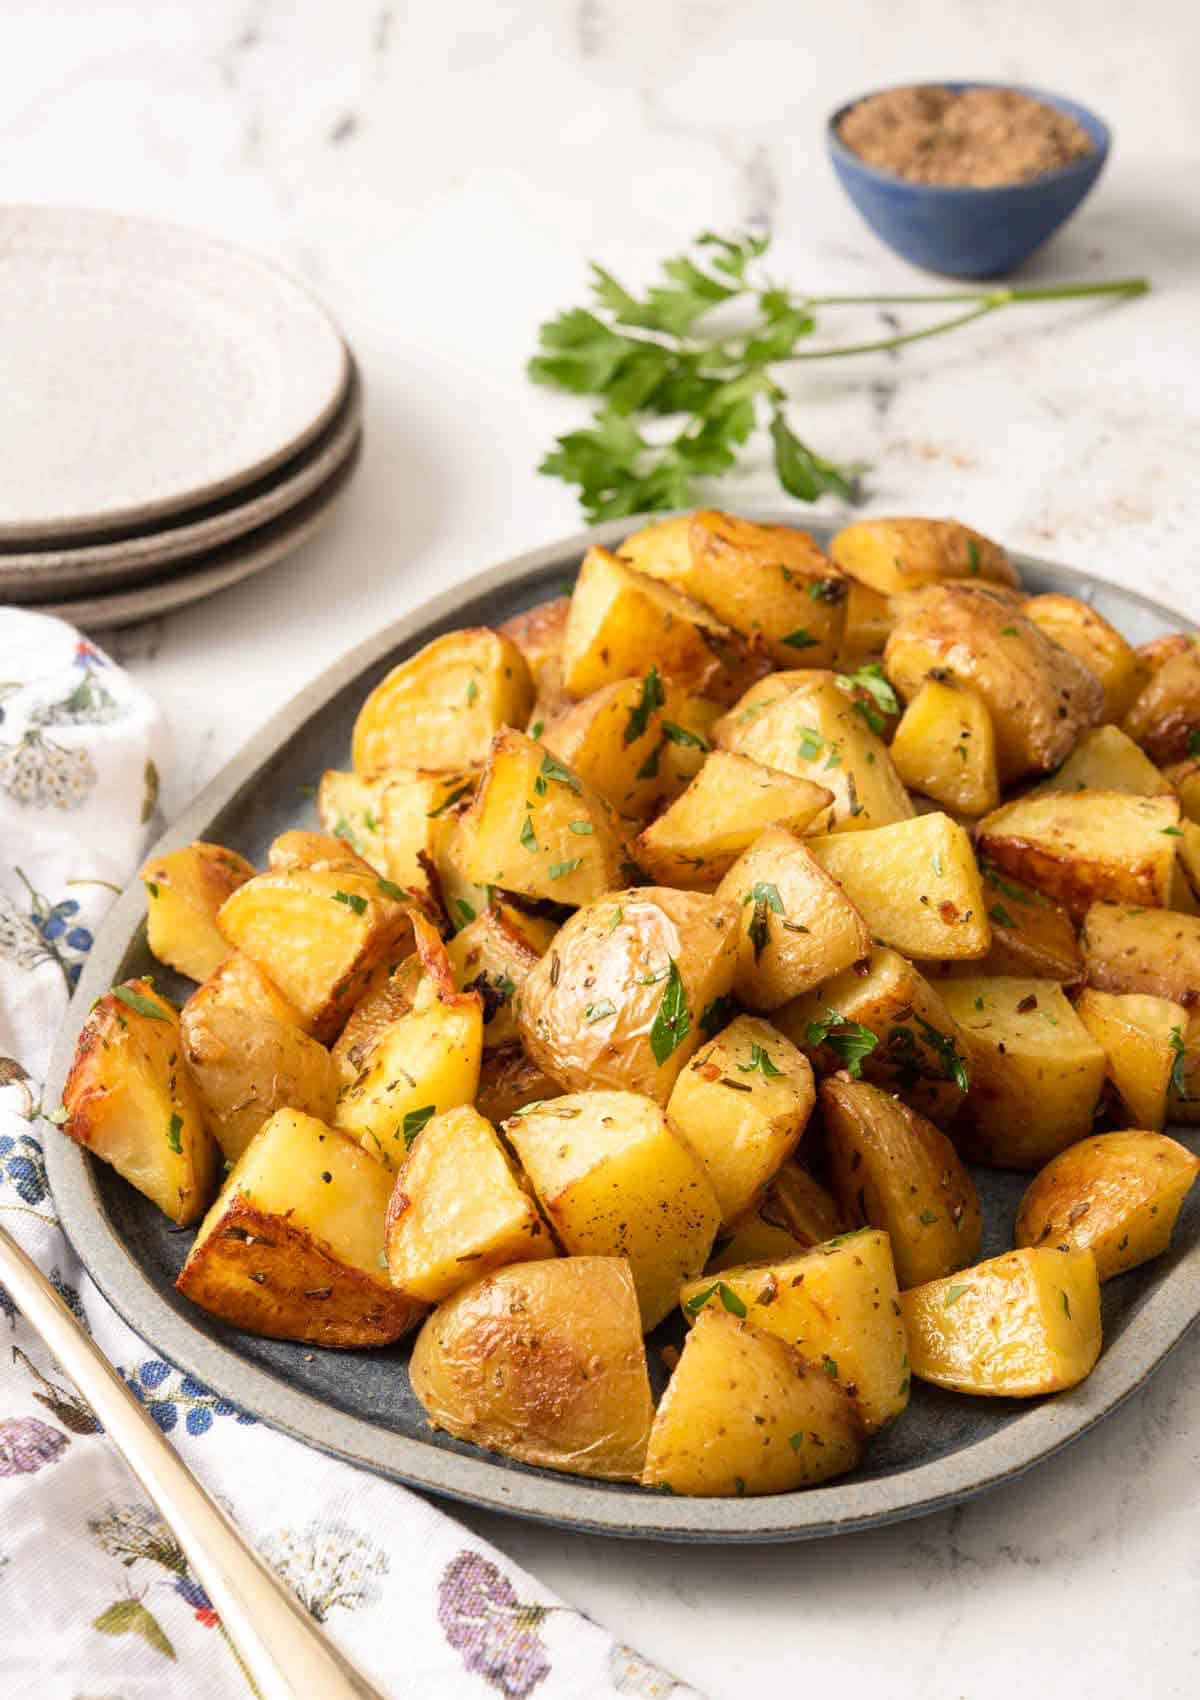 A platter of roasted potatoes with fresh parsley as garnish and in the background with ground pepper.